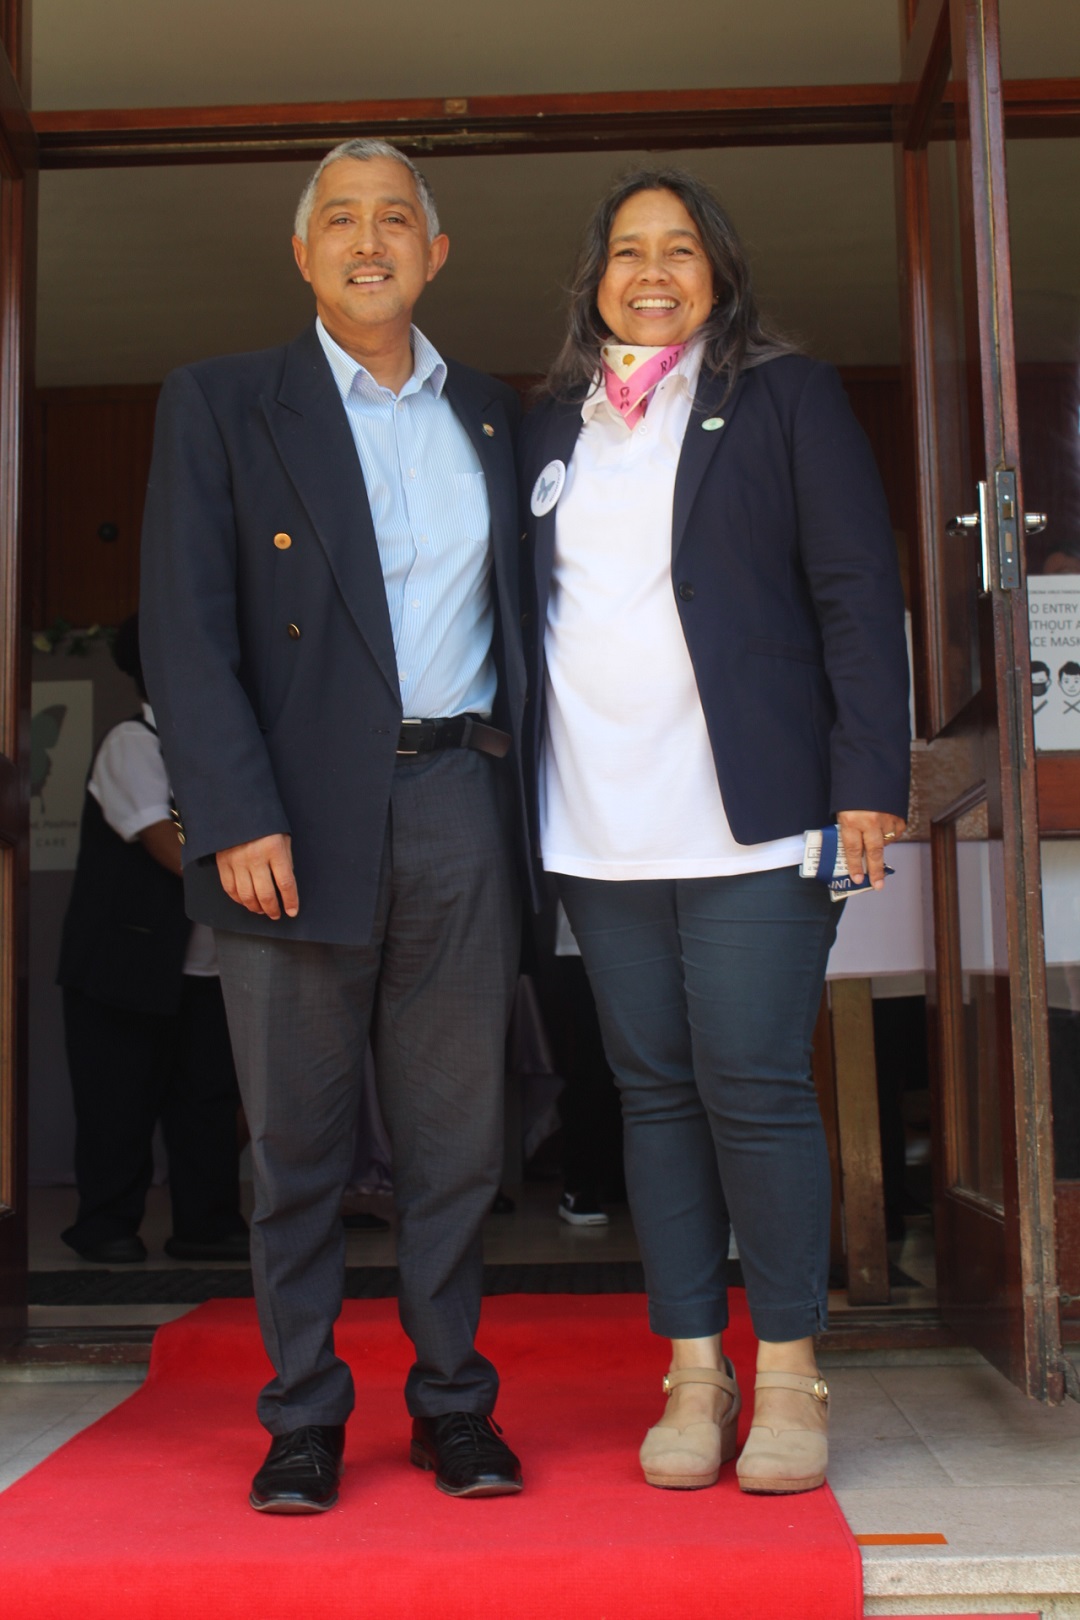 Chief of Operations, Dr Saadiq Kariem, and Chief Director Juanita Arendse at the event.